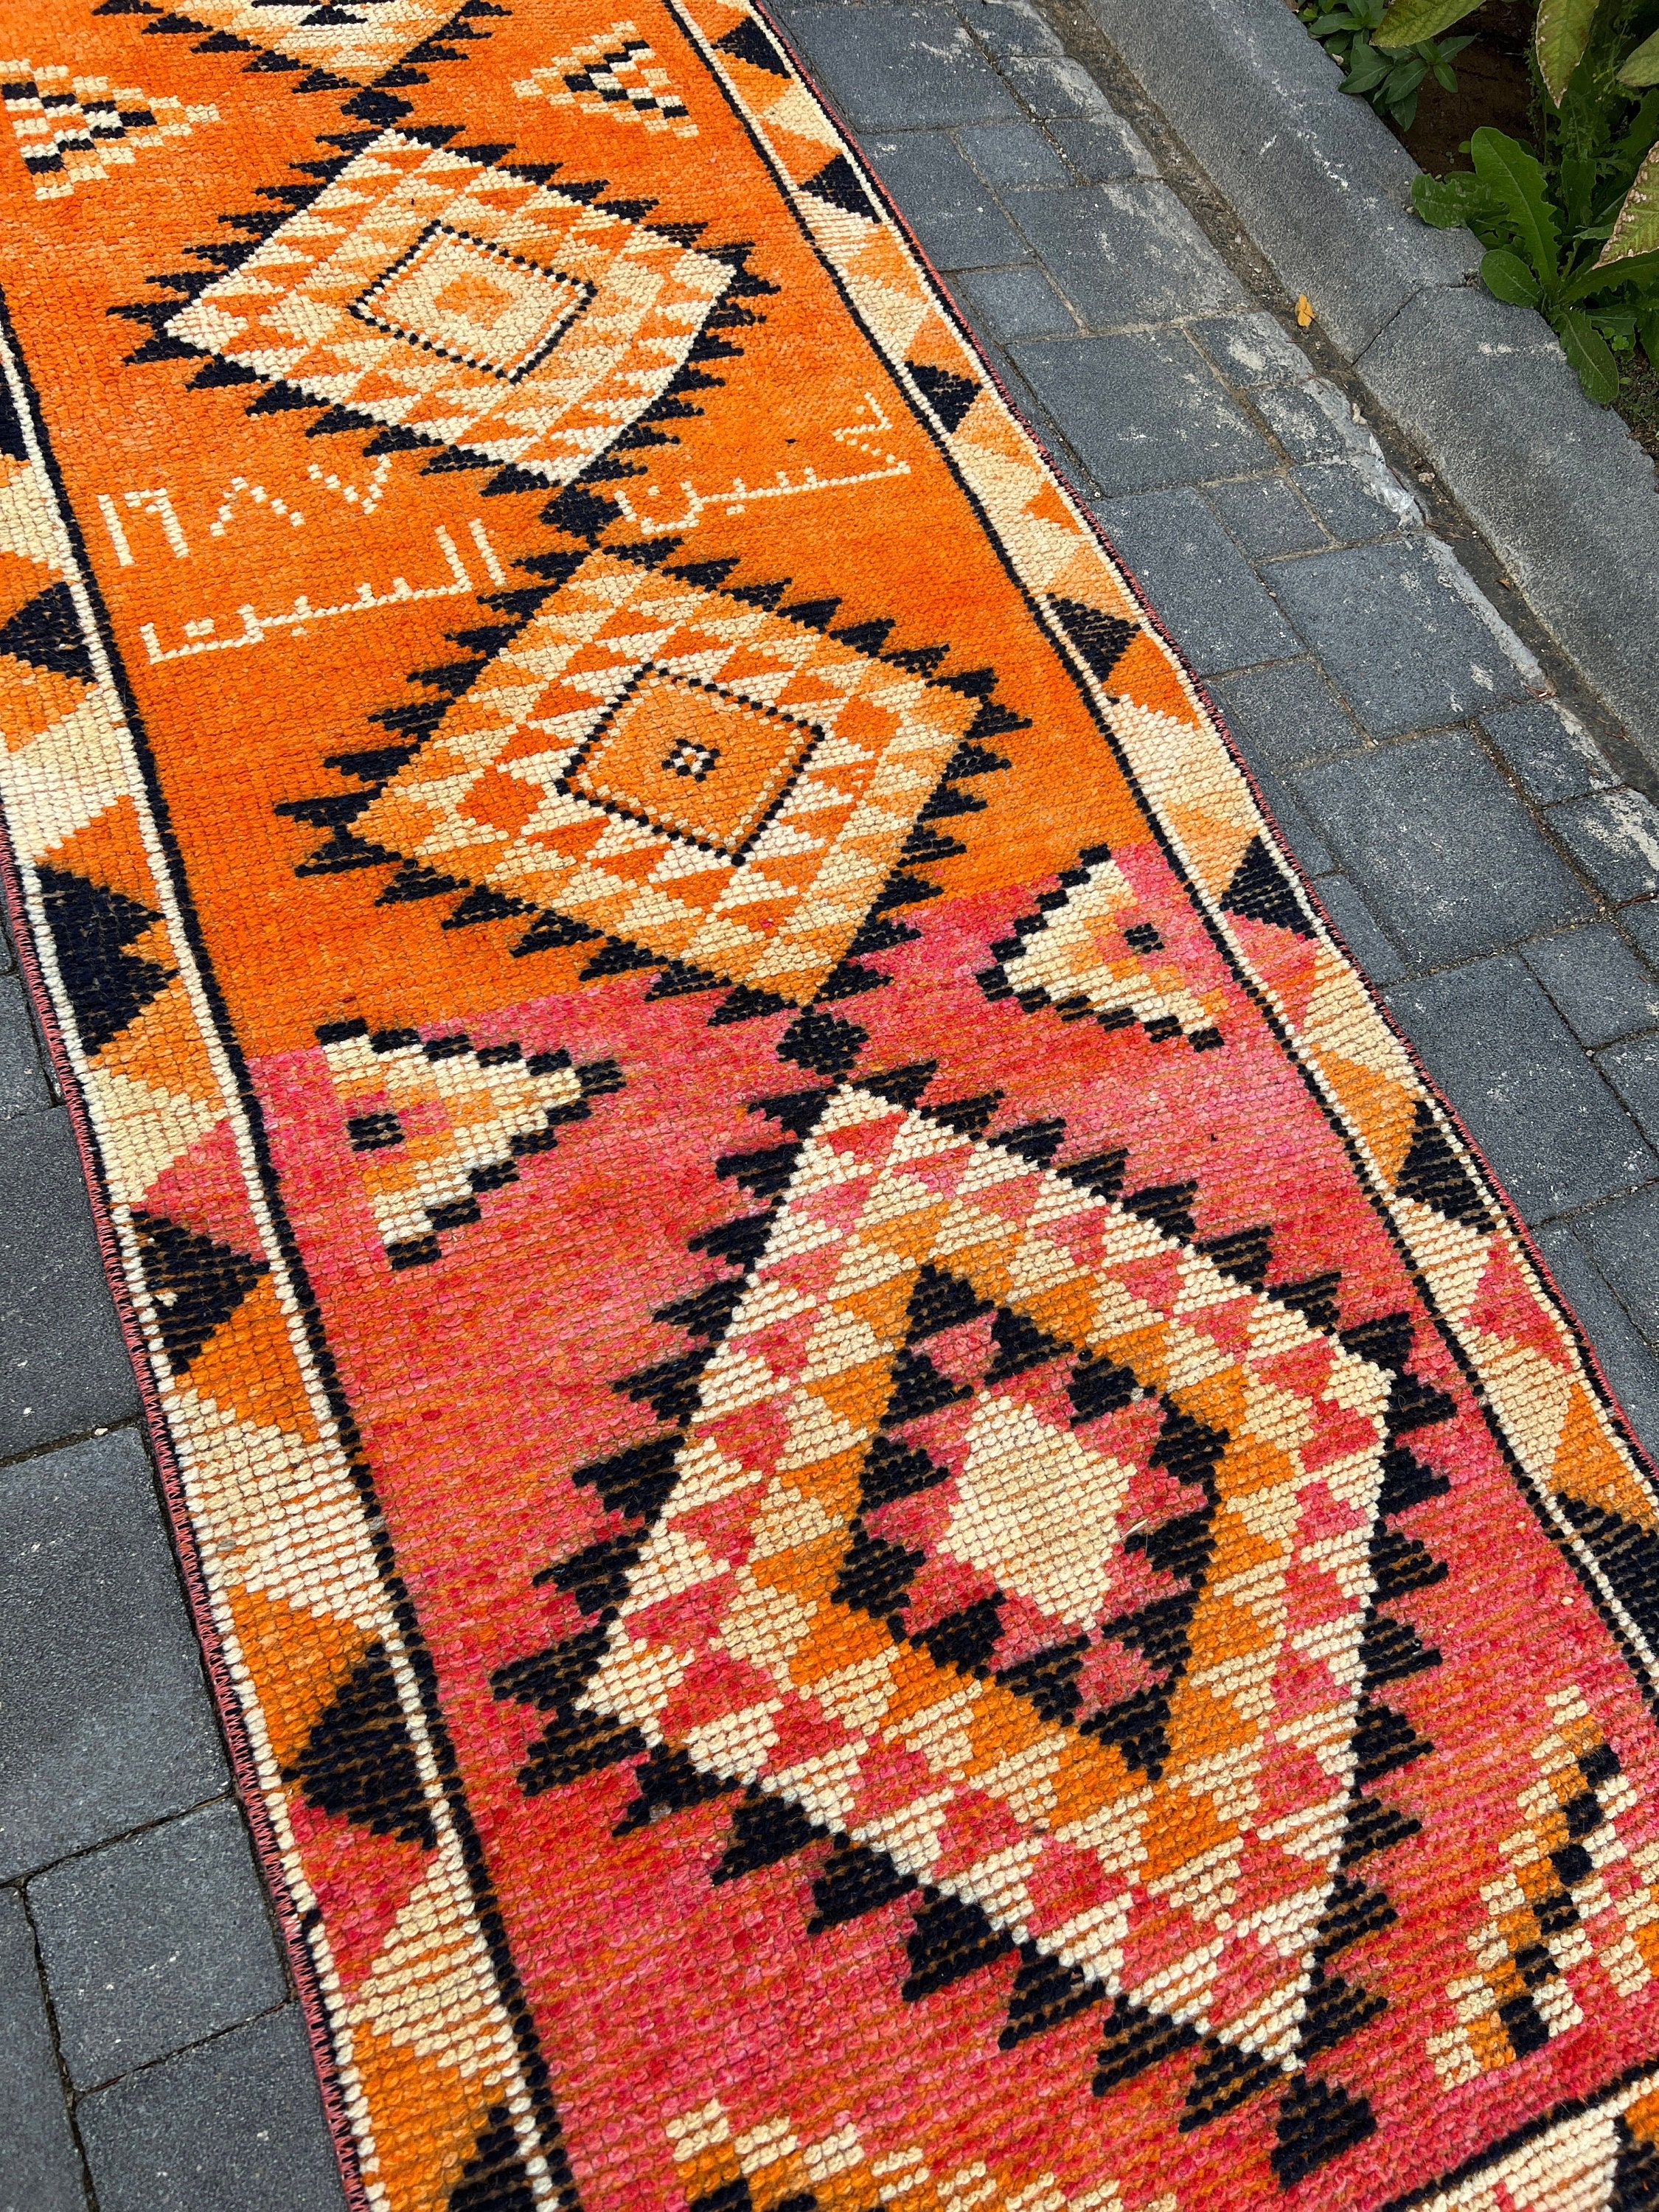 Authentic Rug, 2.9x12.4 ft Runner Rug, Vintage Rug, Turkish Rugs, Kitchen Rugs, Rugs for Kitchen, Home Decor Rugs, Orange Kitchen Rug